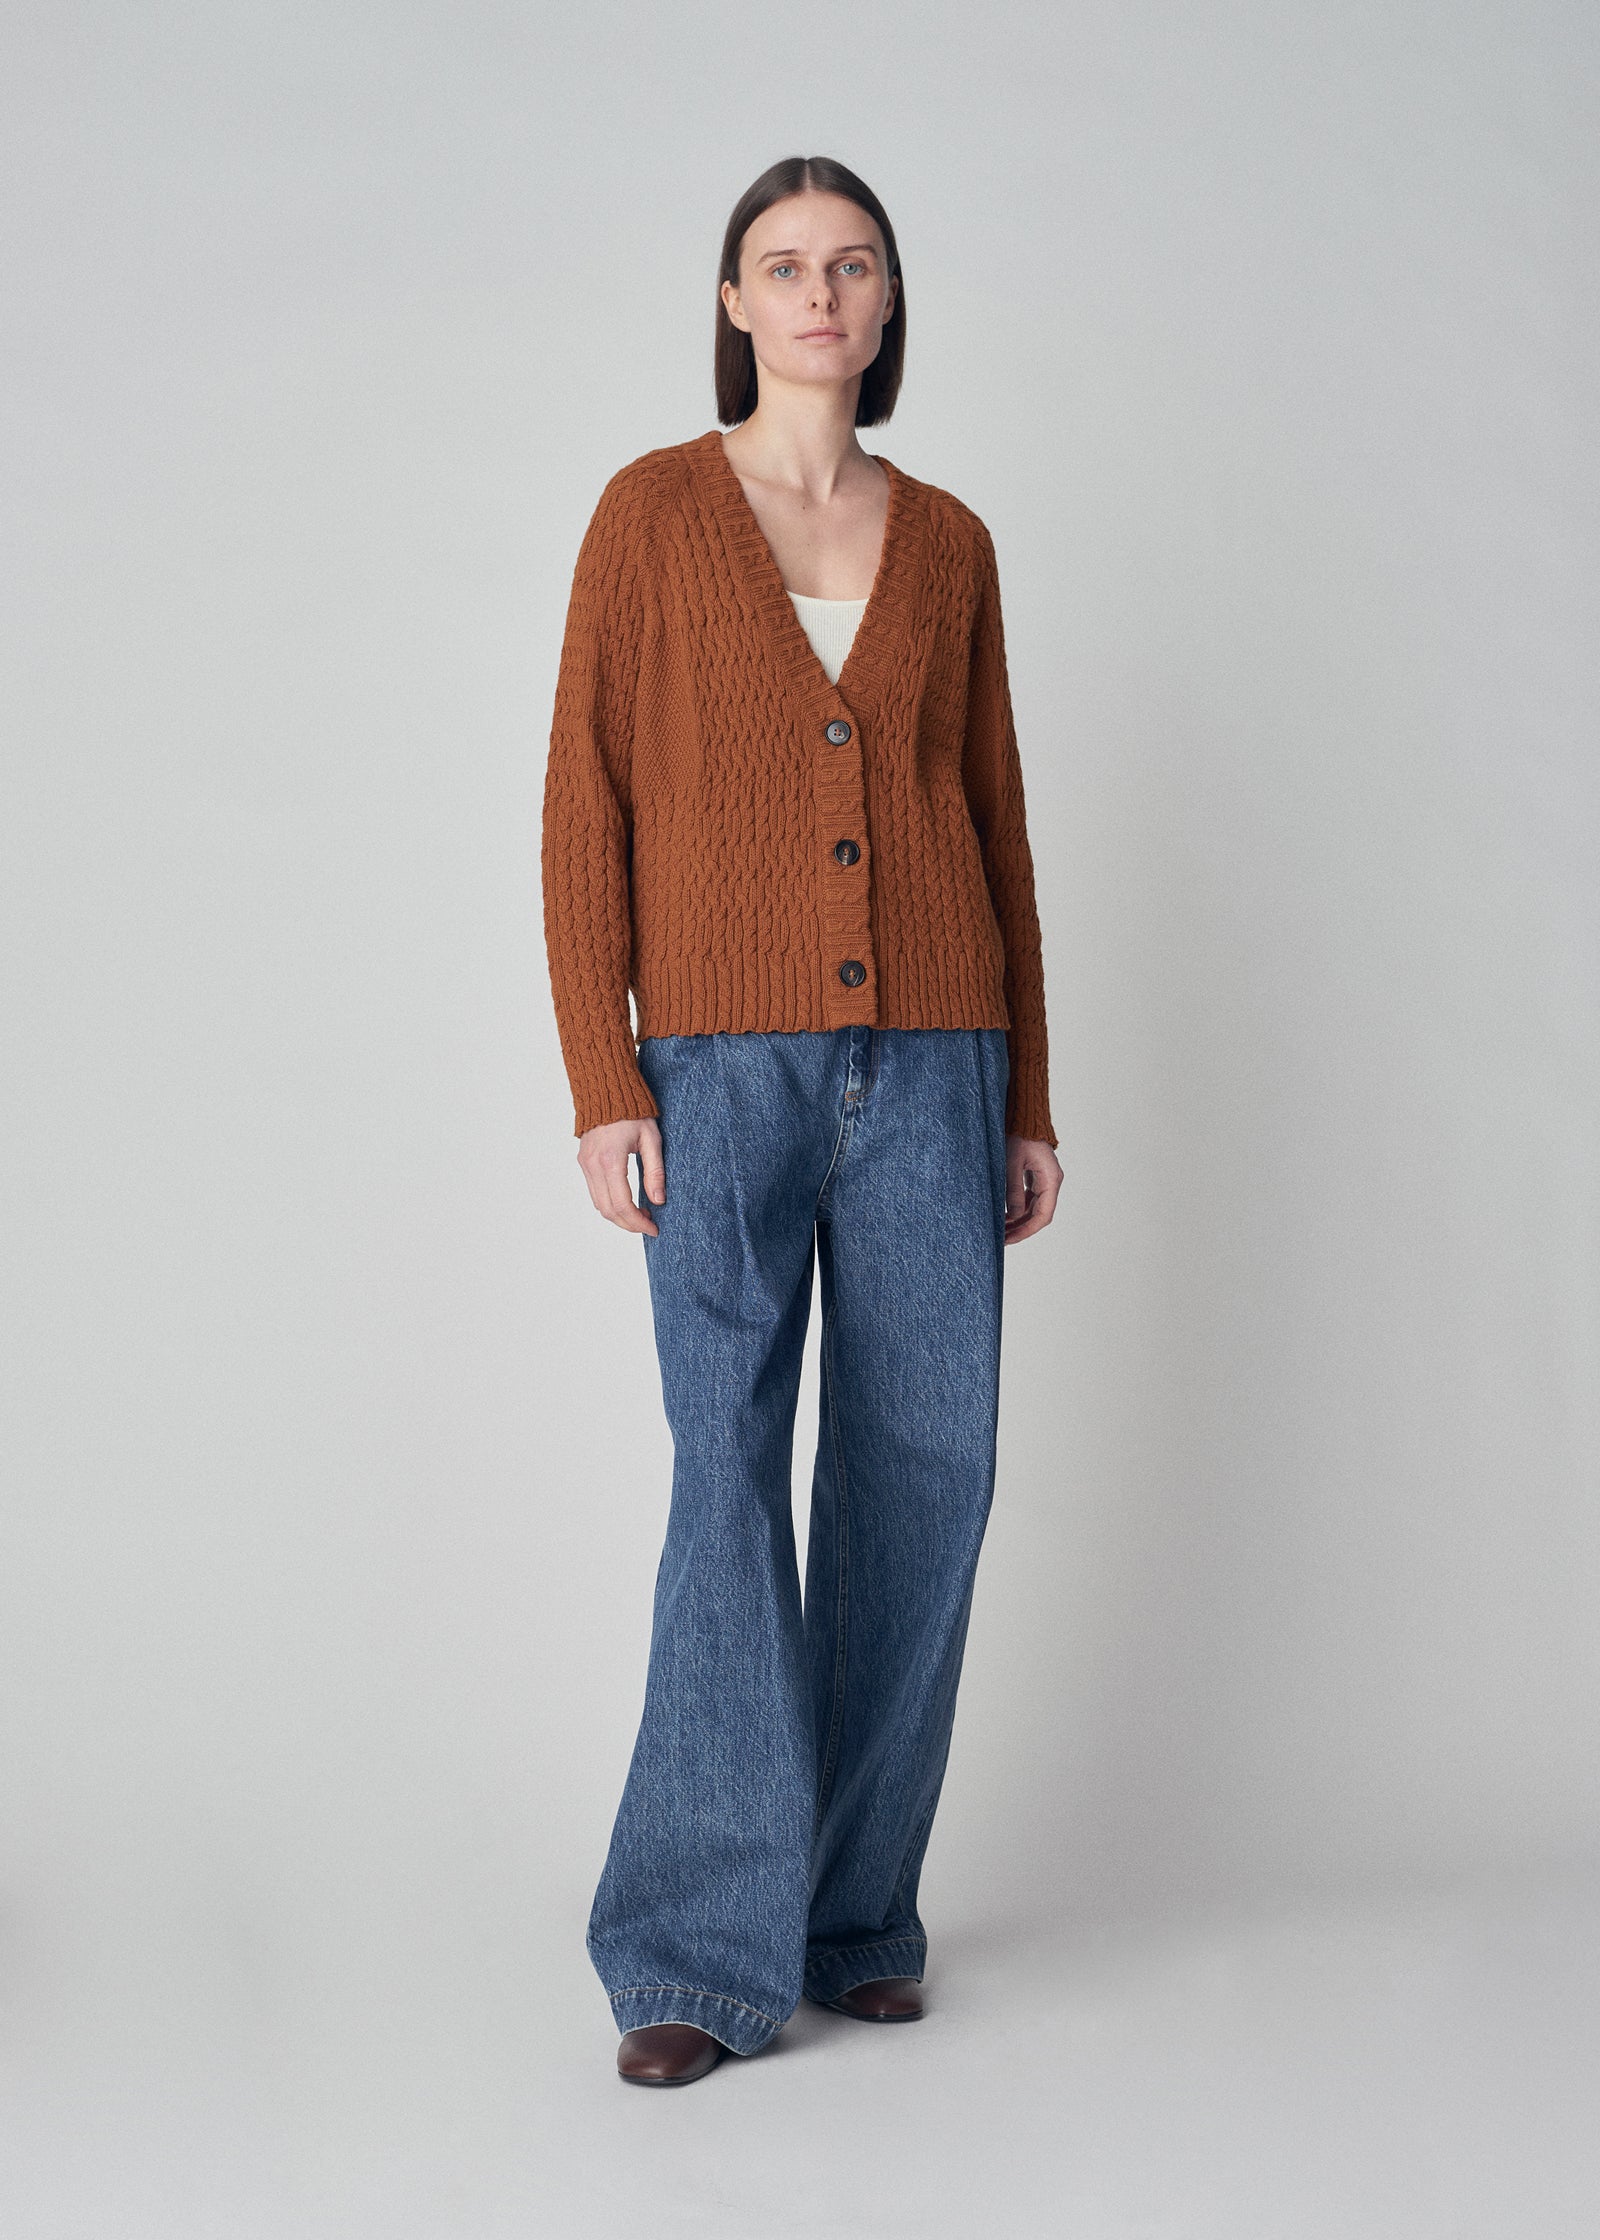 Patchwork Cable Cardigan in Cotton Knit - Chestnut - CO Collections